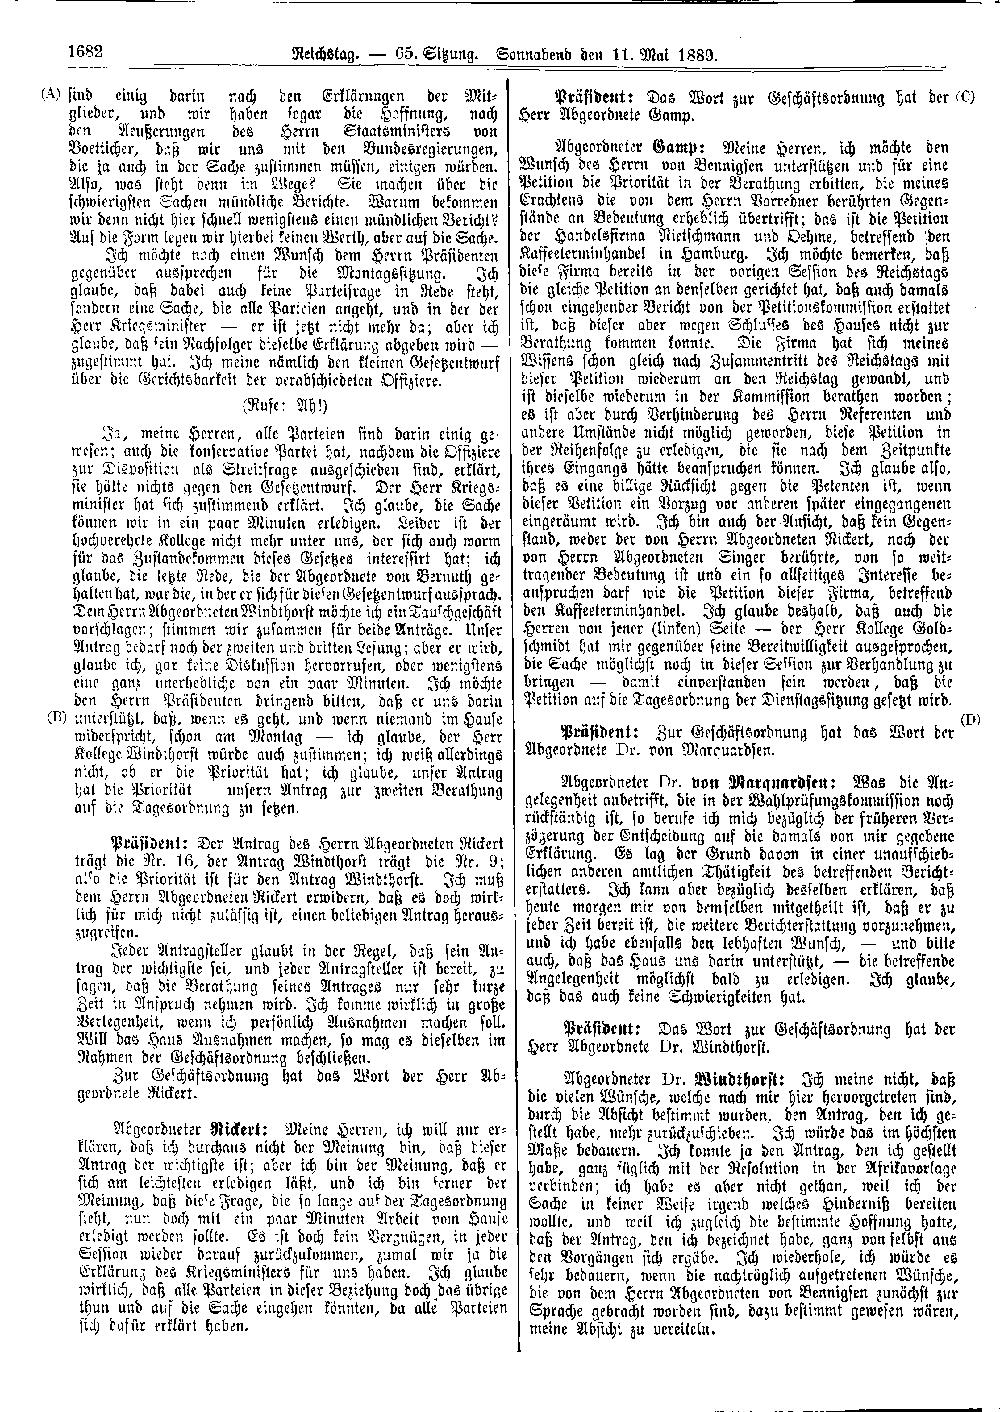 Scan of page 1682